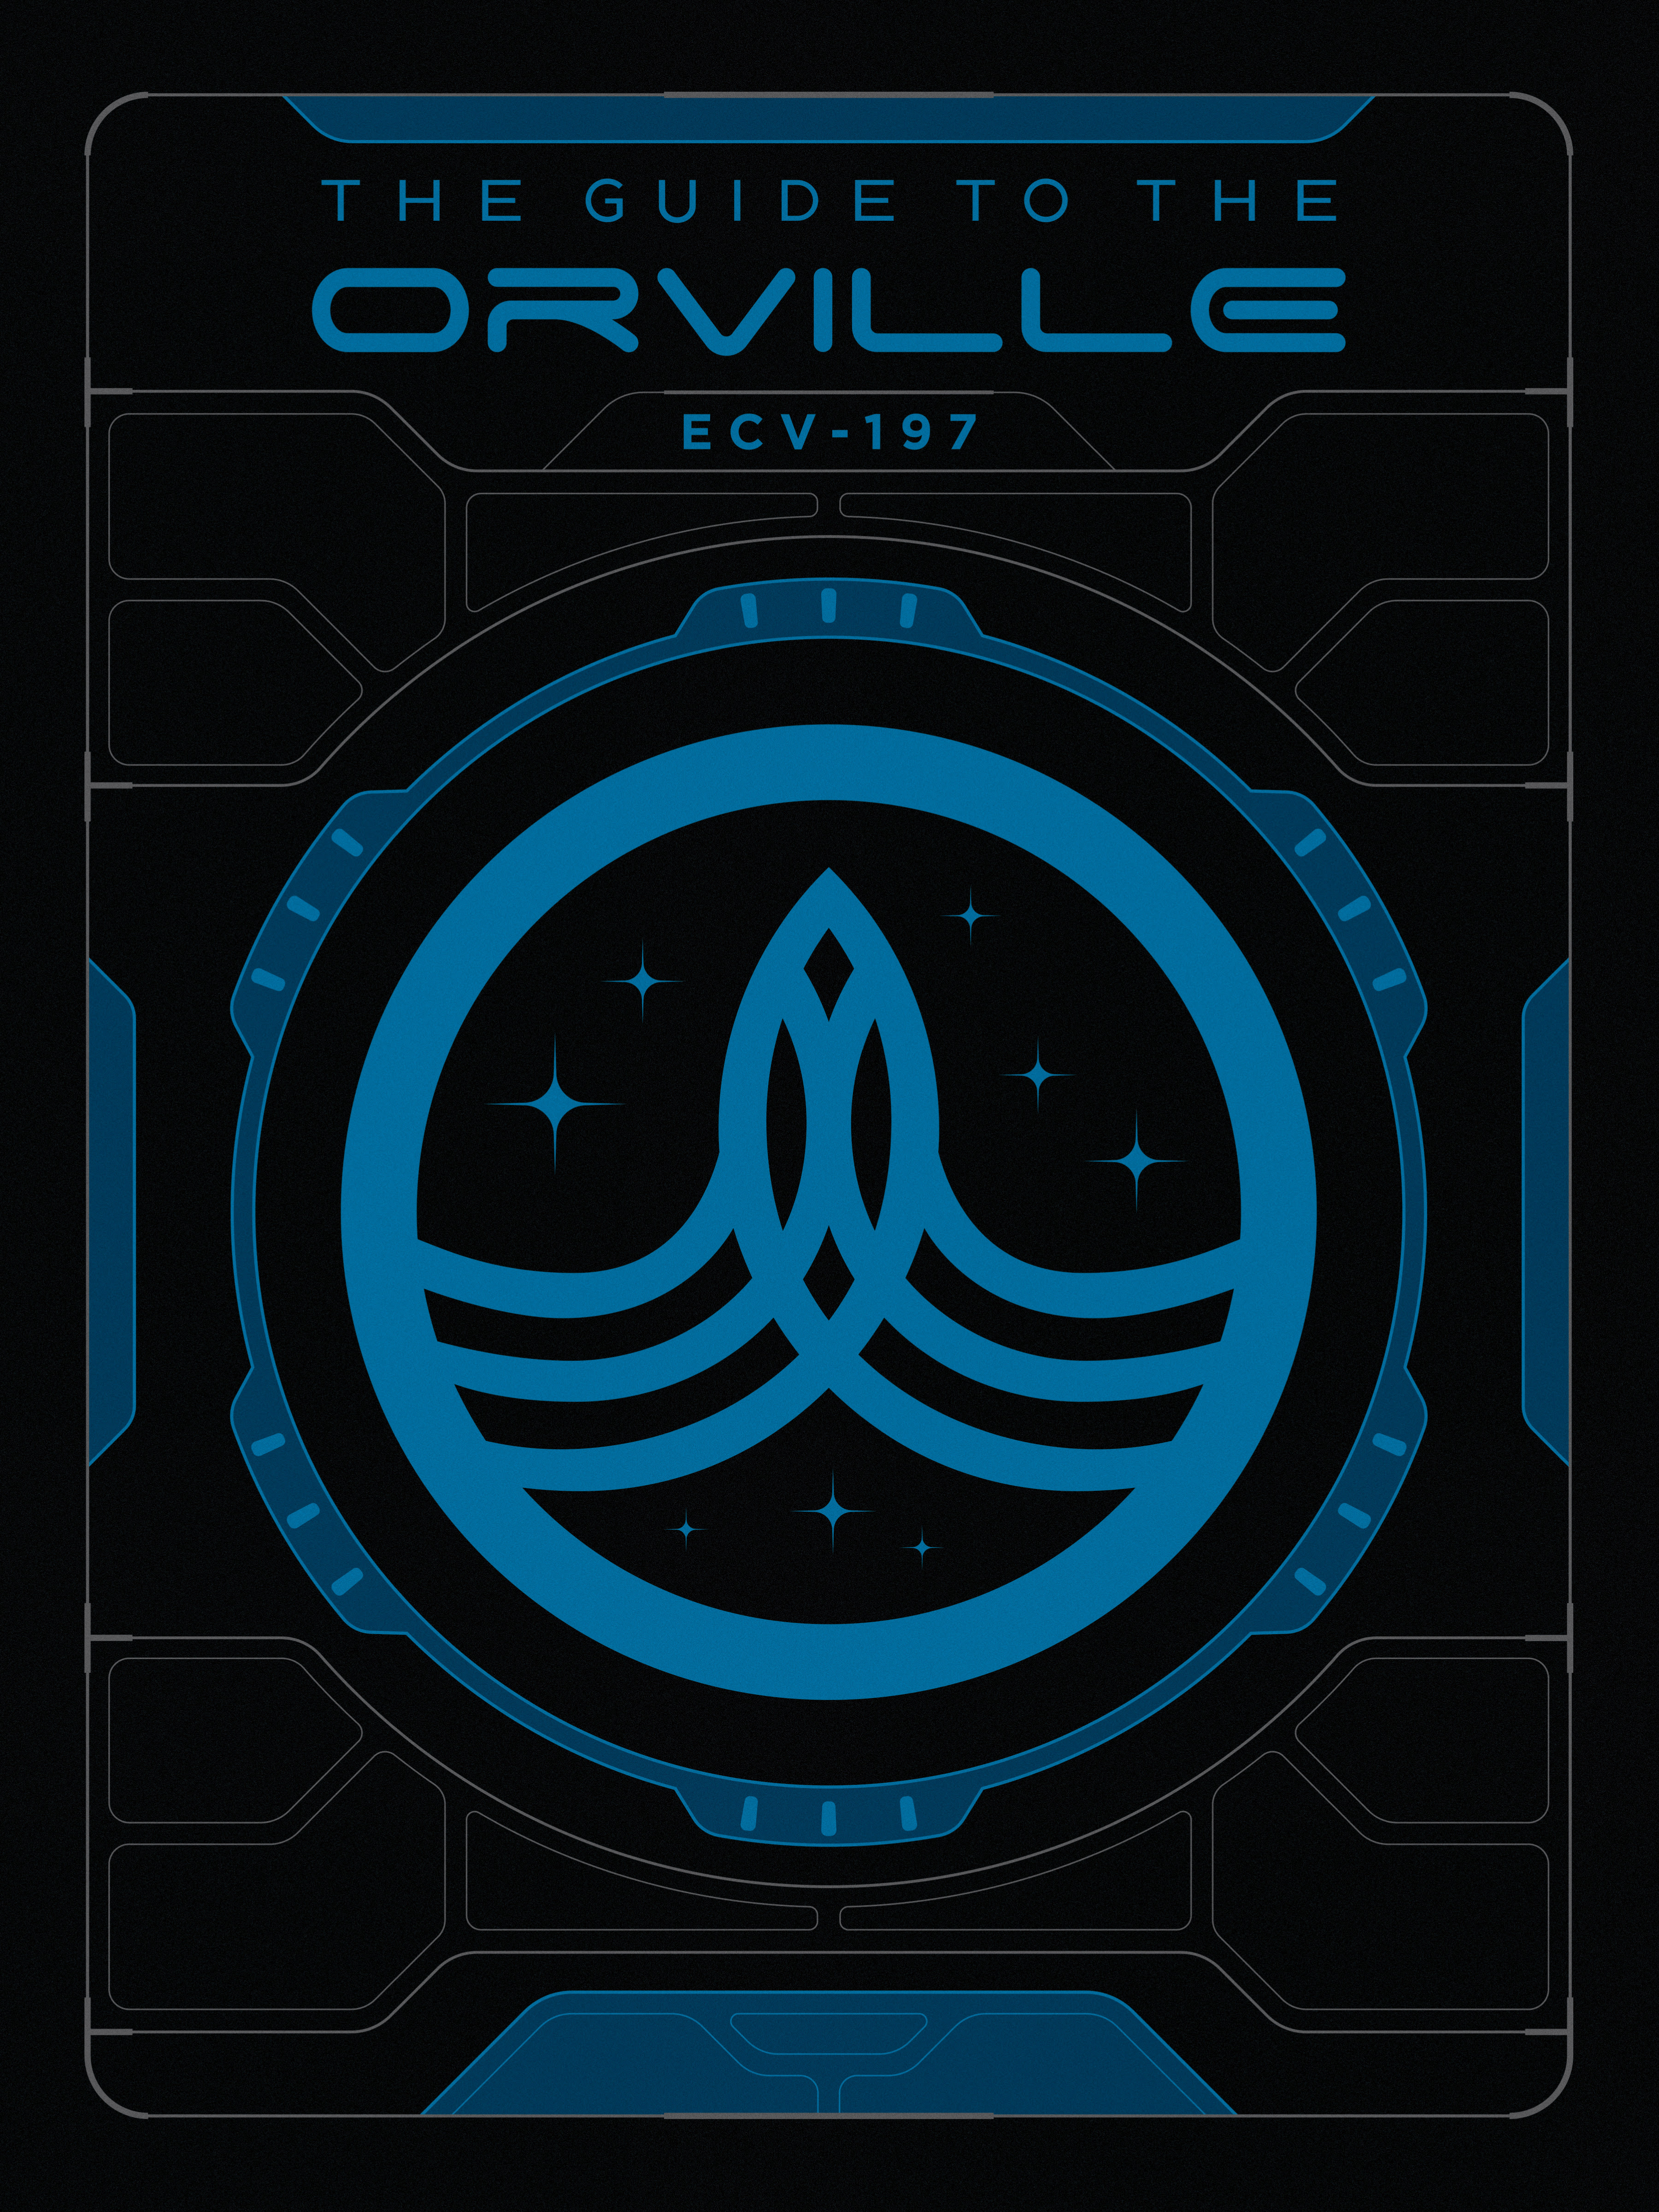 The Guide to the Orville 